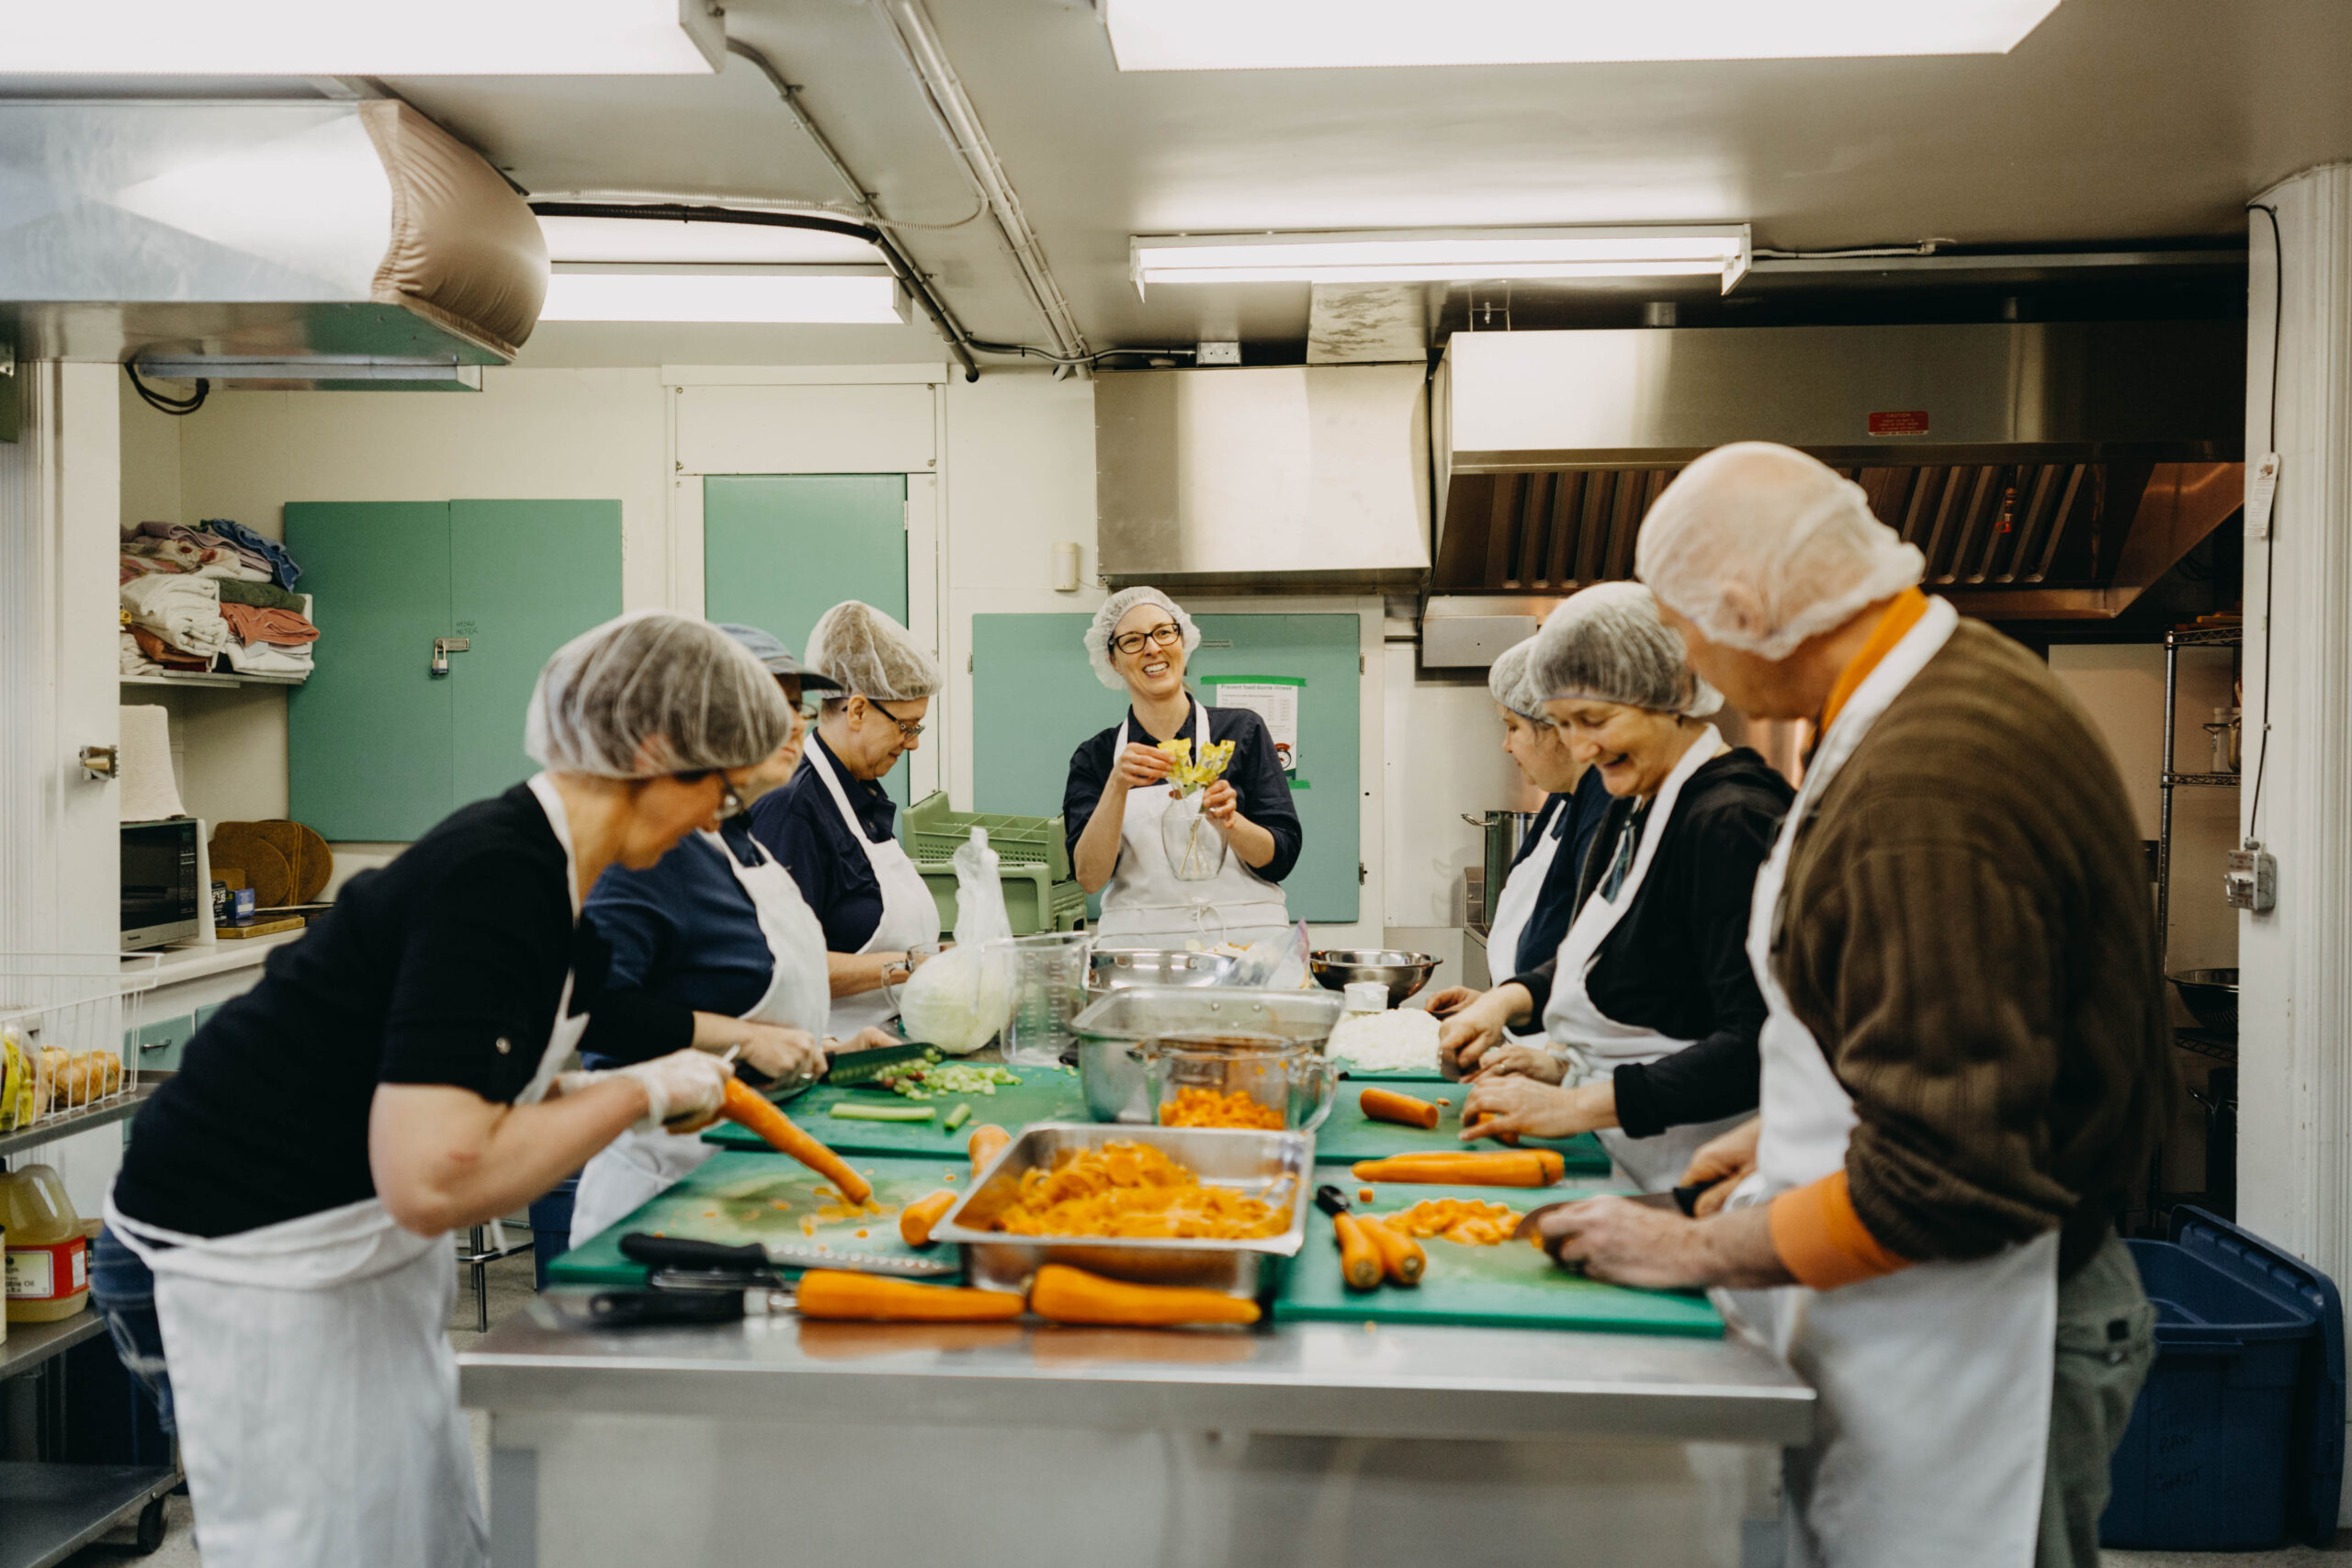 A group of people in hairnets and aprons peel and chop carrots in an industrial kitchen. They are smiling and laughing.